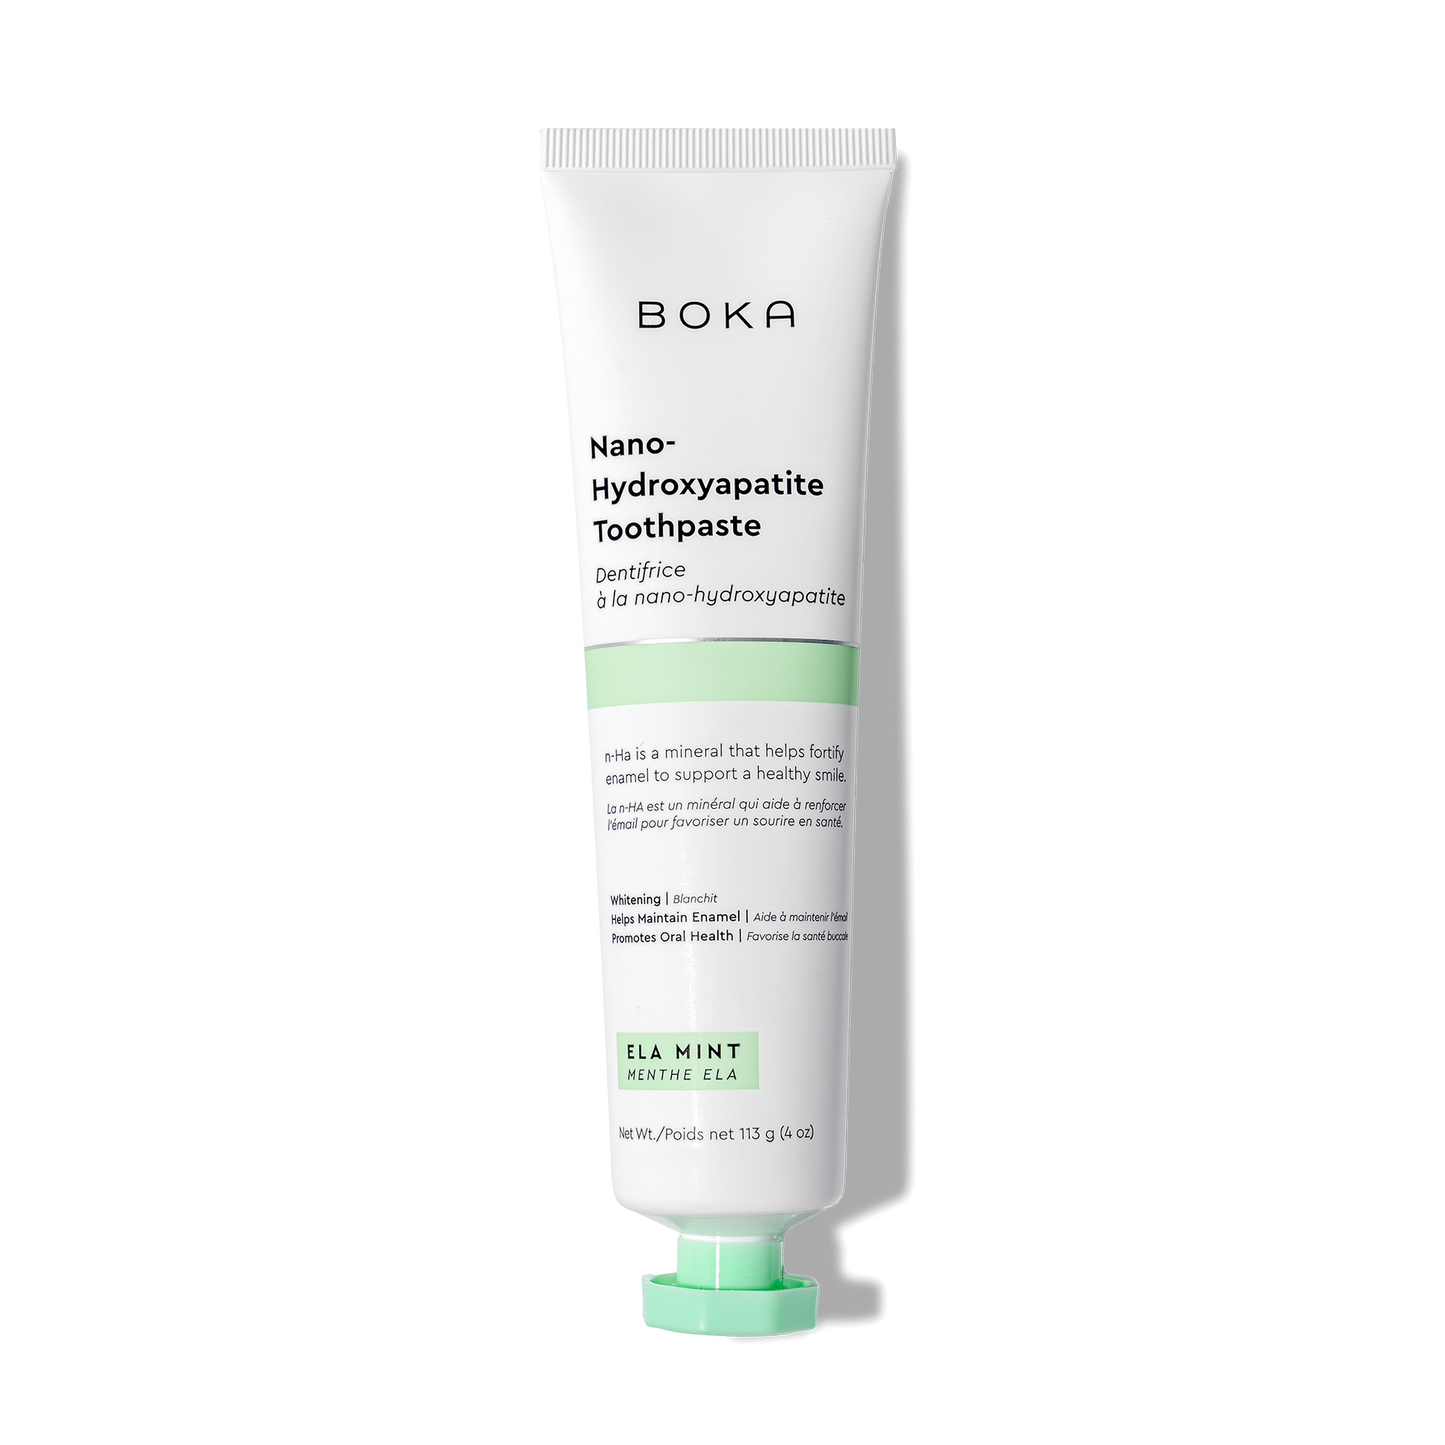 Boka Yearly Subscription of Toothpaste